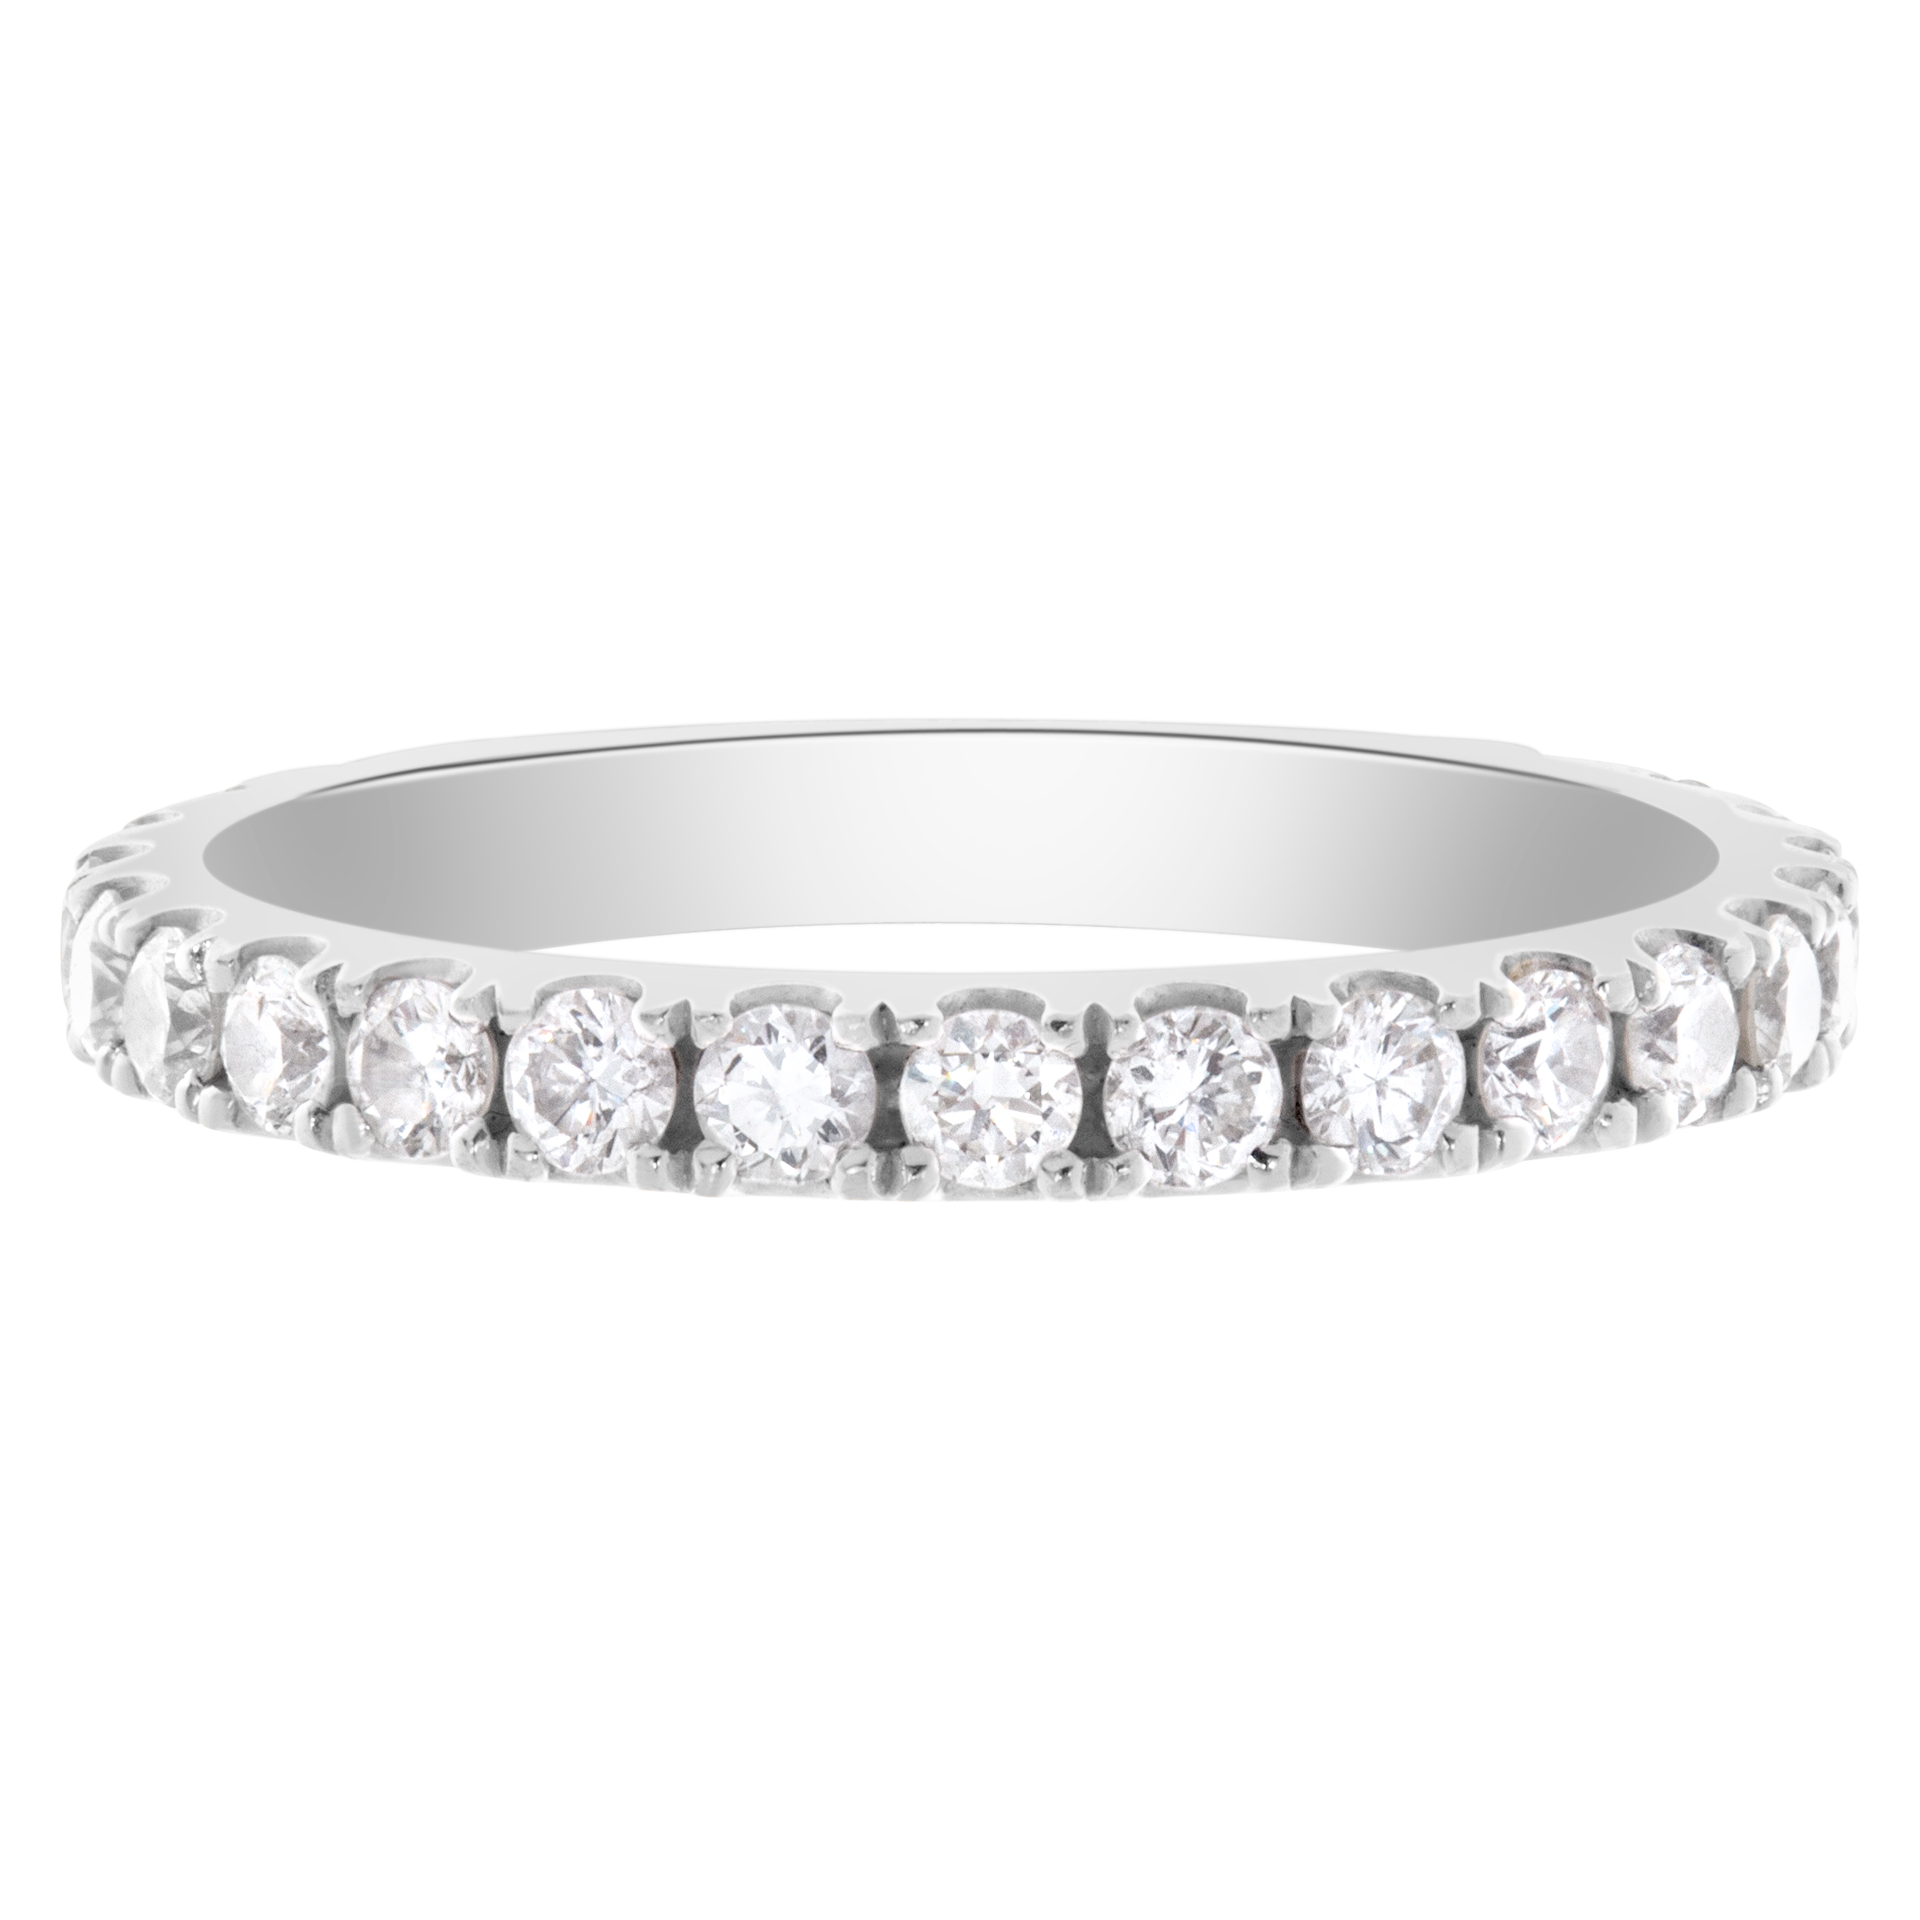 Diamond Eternity Band and Ring in 18k white gold